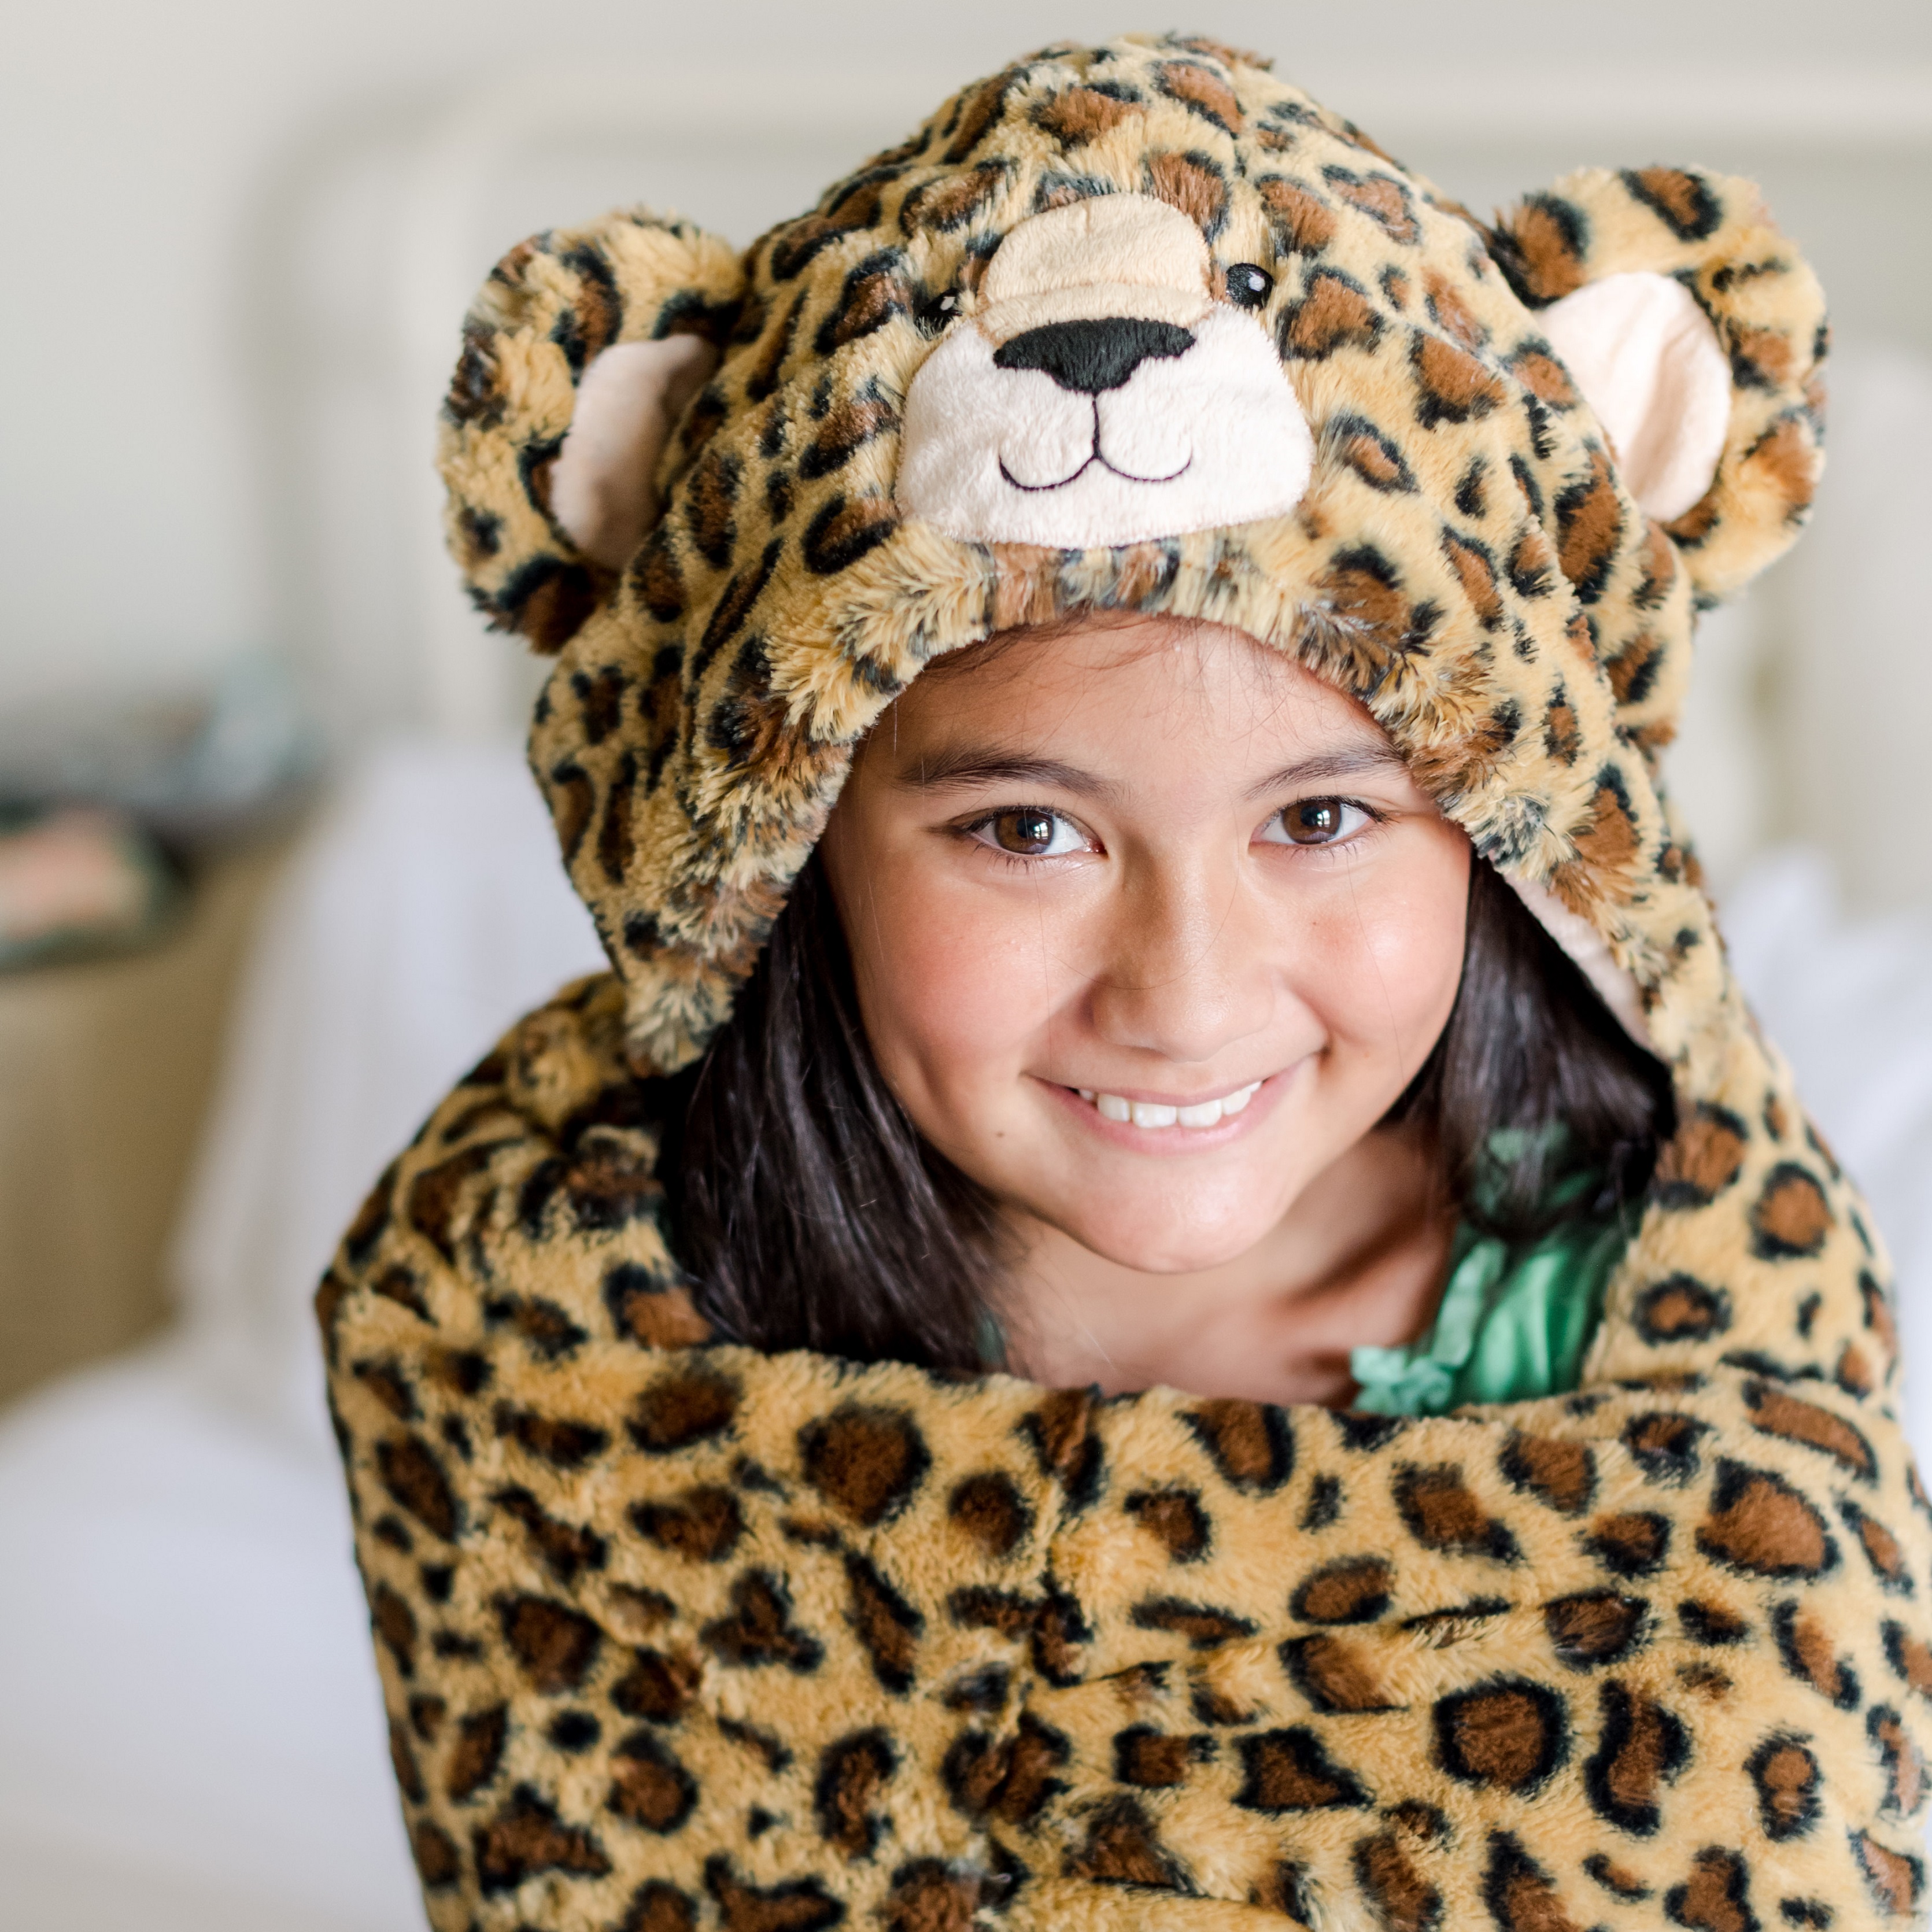 Animal Adventure Wild for Style™ 2-in-1 Transformable Cape 10" Leopard Plush Toy - image 2 of 7